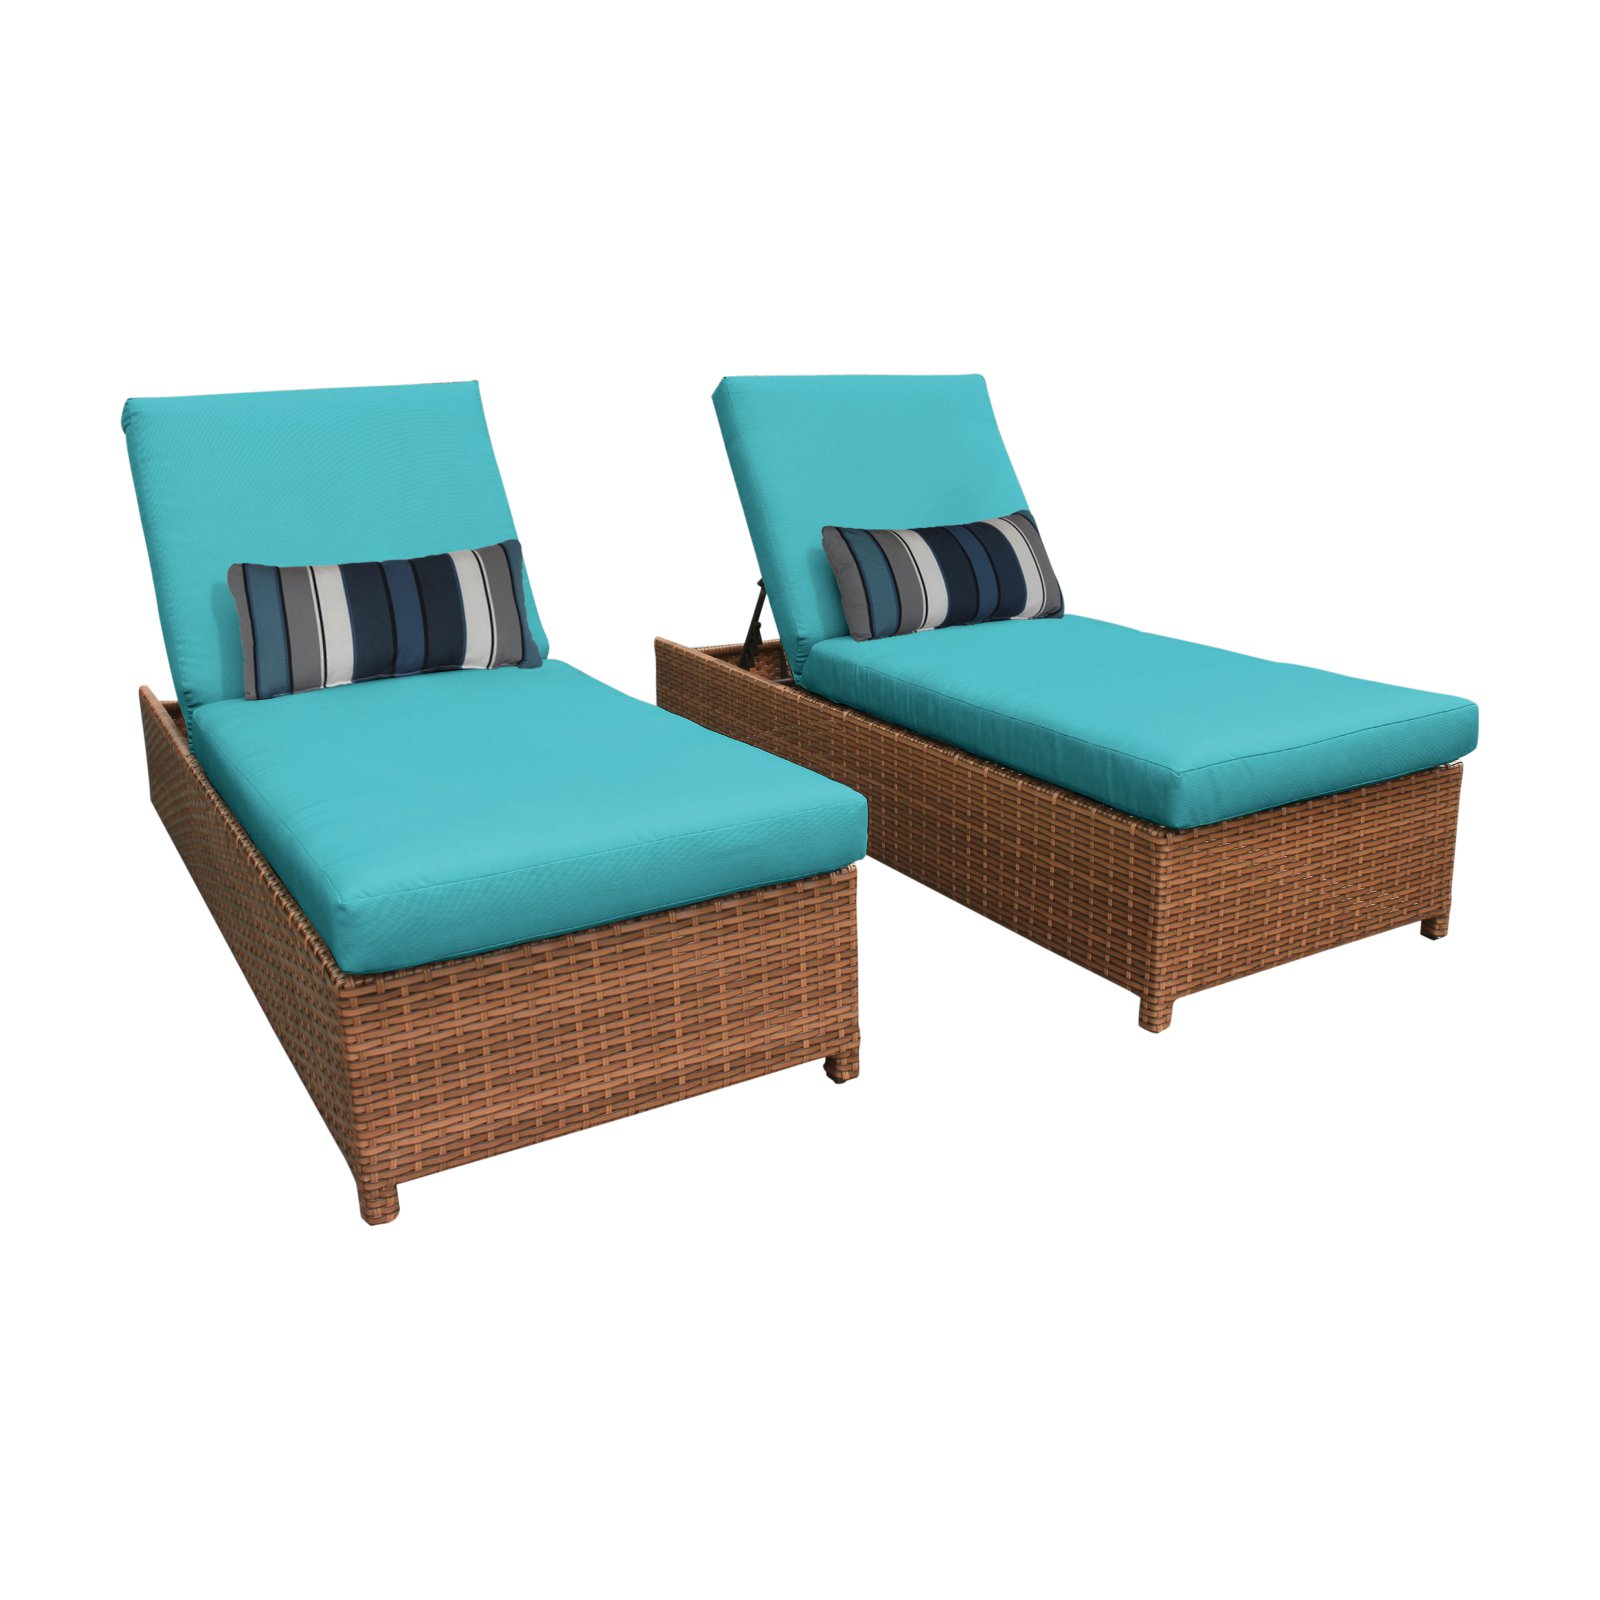 TK Classics Laguna Wheeled Wicker Outdoor Chaise Lounge Chair - Set of 2 - image 2 of 11